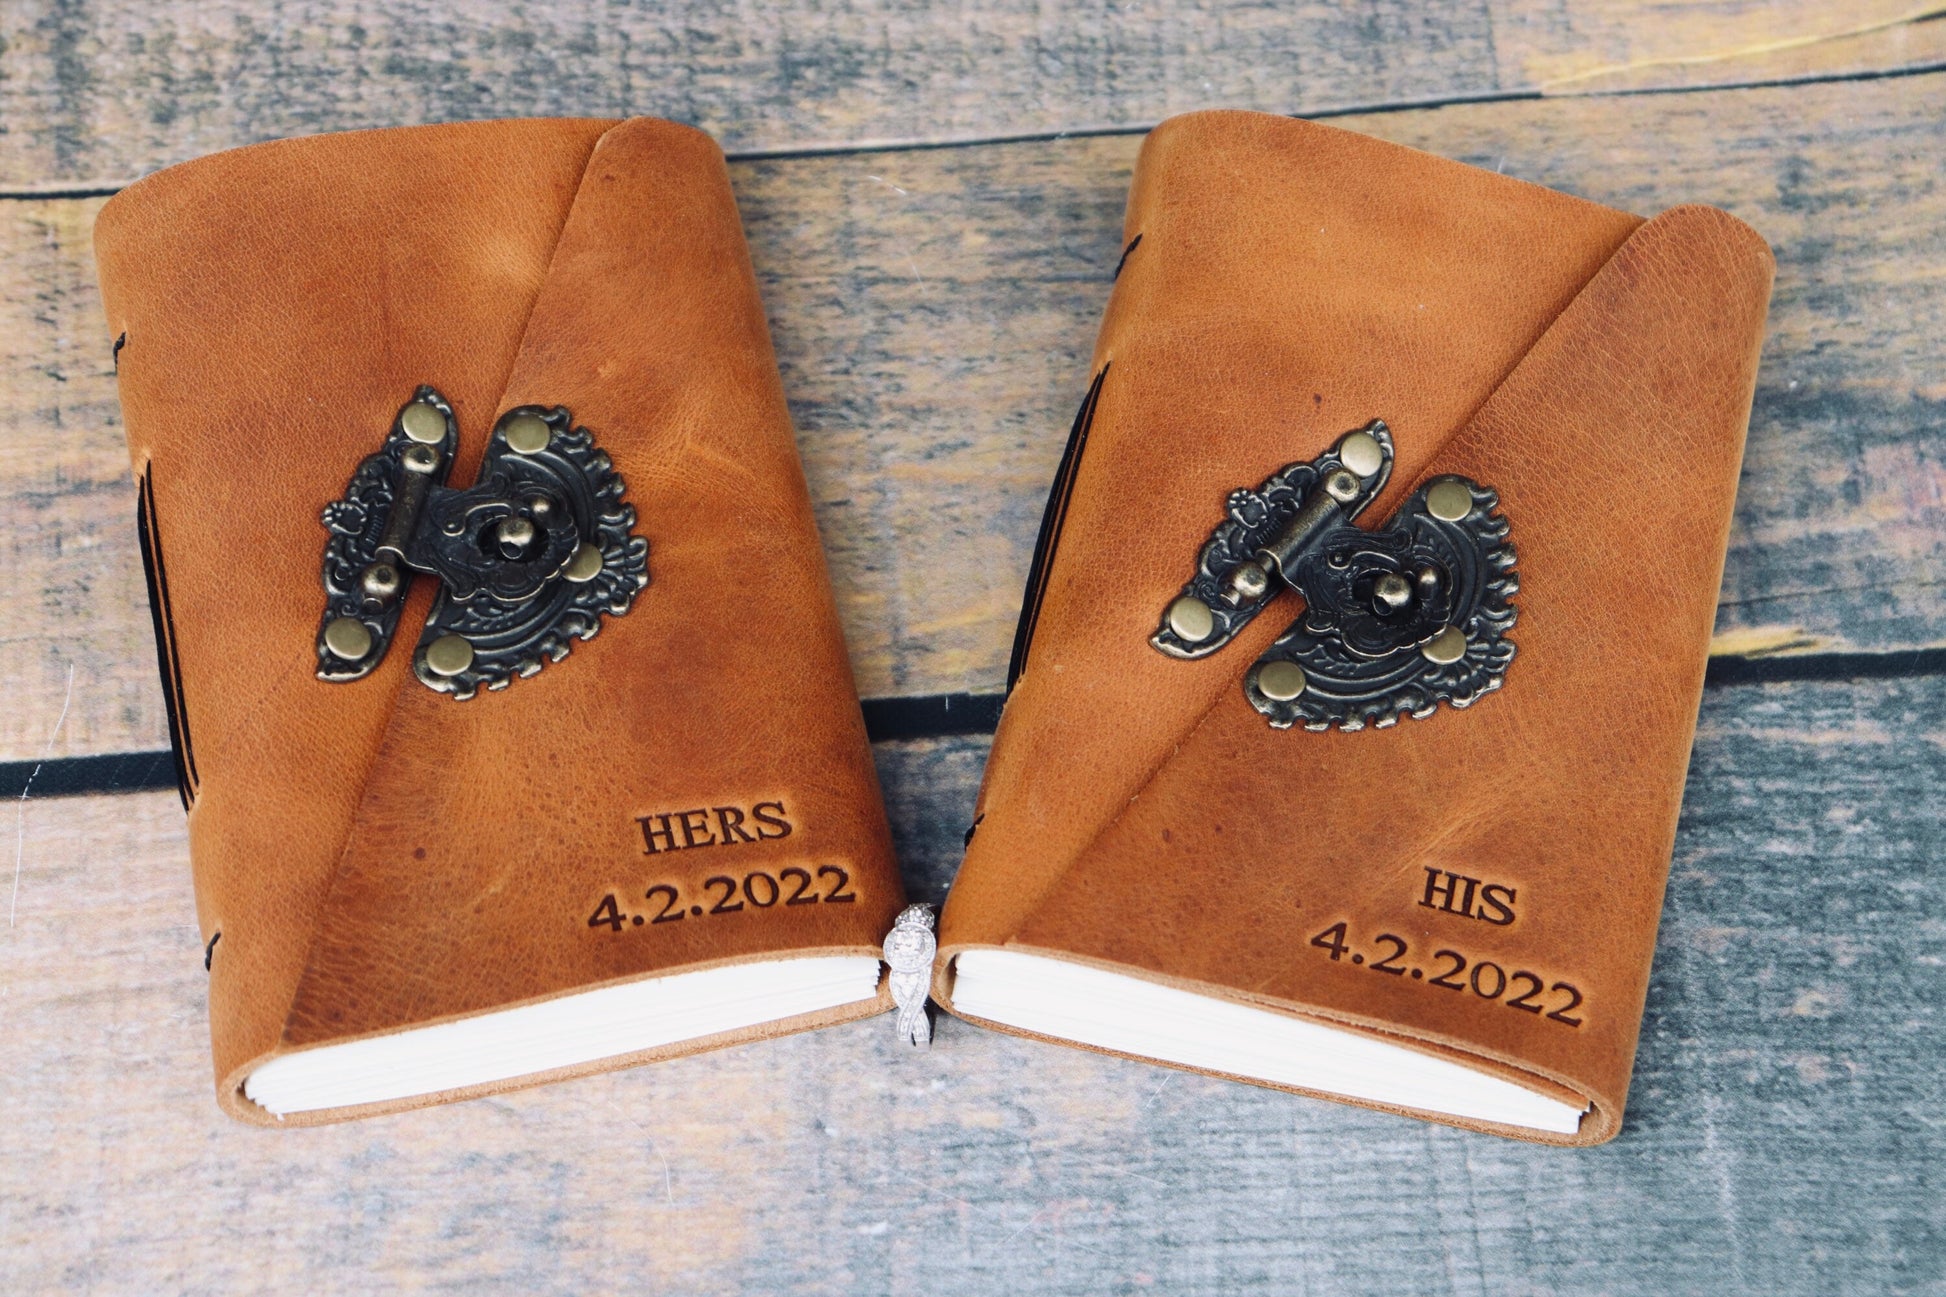 VOWS BOOKS 2.0! Set of Personalized Wedding Vows Books, Premium Leather Bound Journals for Bride & Groom, Rustic Wedding Gift